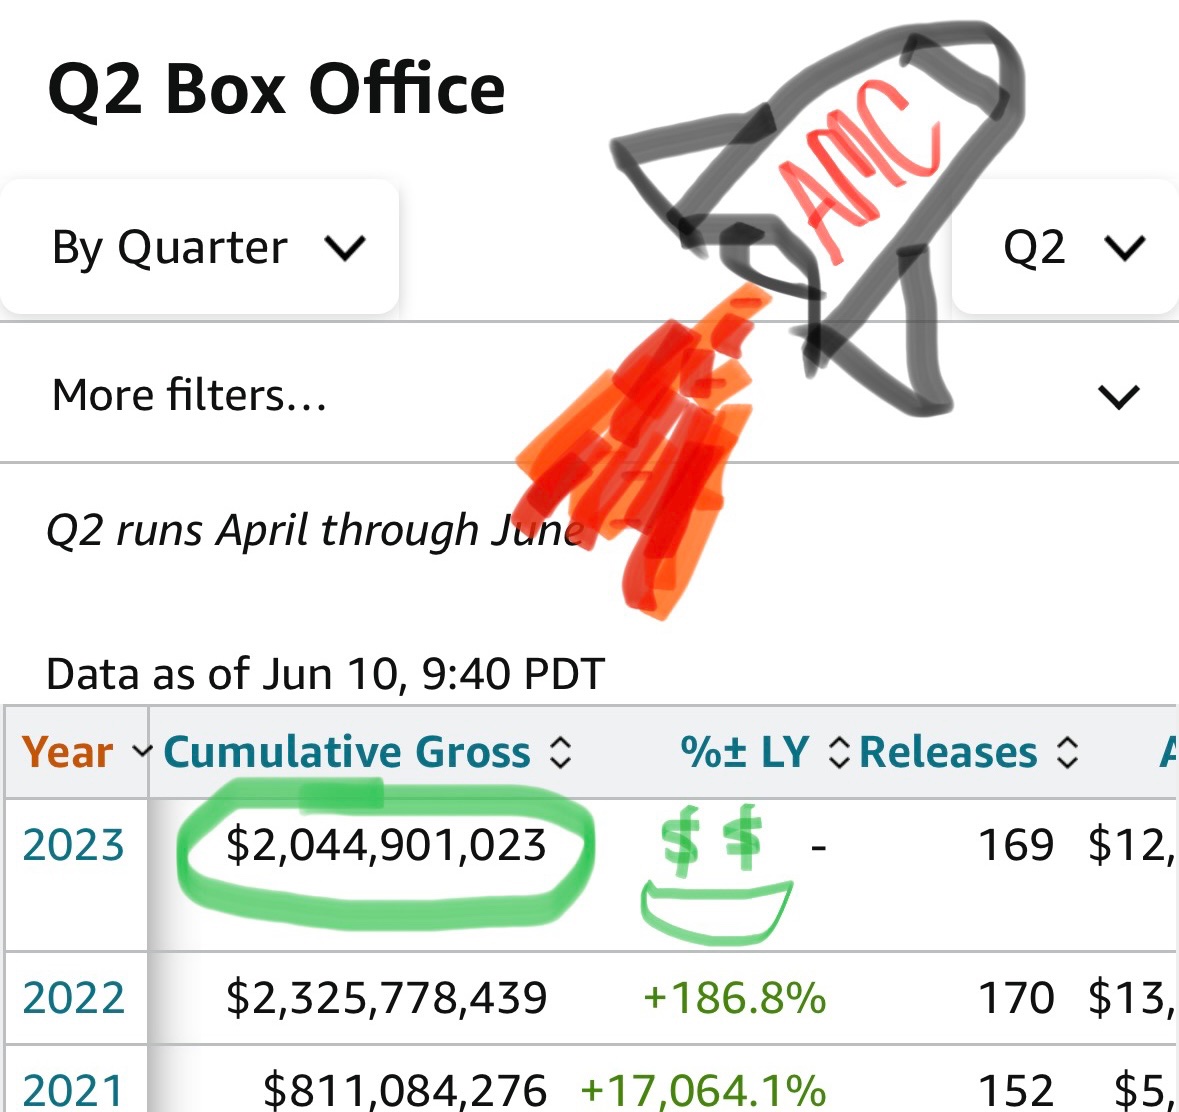 The box office is booming! Over 2 billion for Q2! Keep it up #APES 
🦍🦍💎💎🚀🚀🍿🍿🎥🎥

#AMC #AMCAPES #AMCSTOCK #AMCSTOCK #AMCTheatres #AMCNOTLEAVING #AMCPerfectlyPopcorn #APESNOTLEAVING #APESNEVERLEAVING #ApesTogetherStrong #APEsarewinning $APE $AMC #MOASS